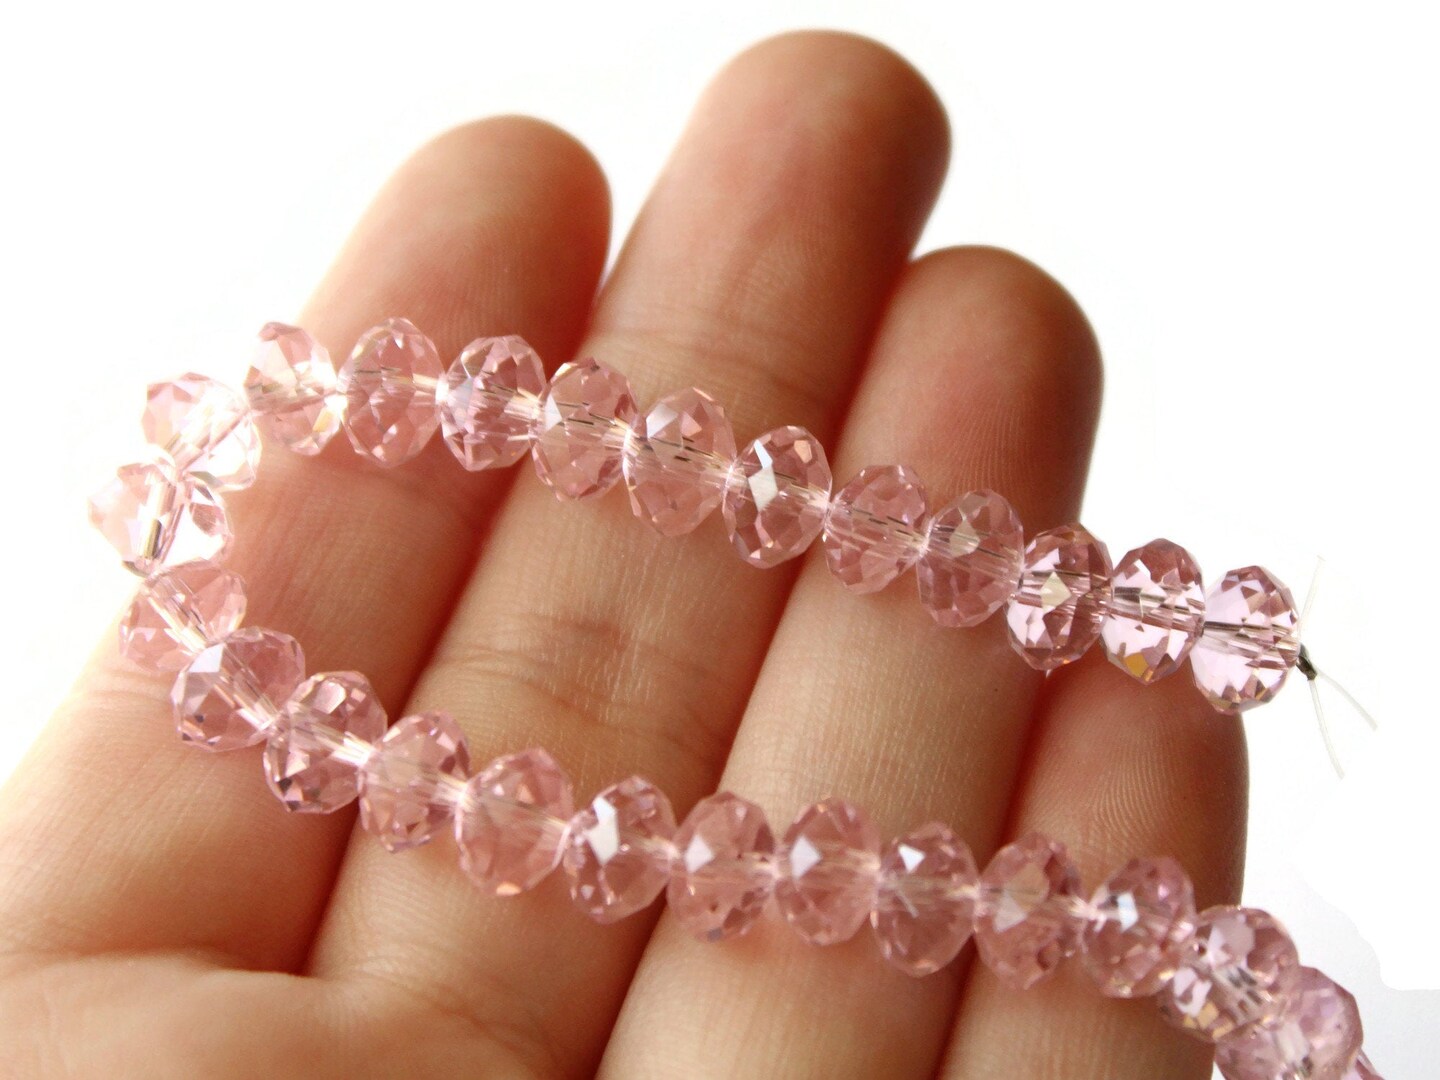 36 6mm x 8mm Pink Crystal Faceted Rondelle Beads by Smileyboy | Michaels